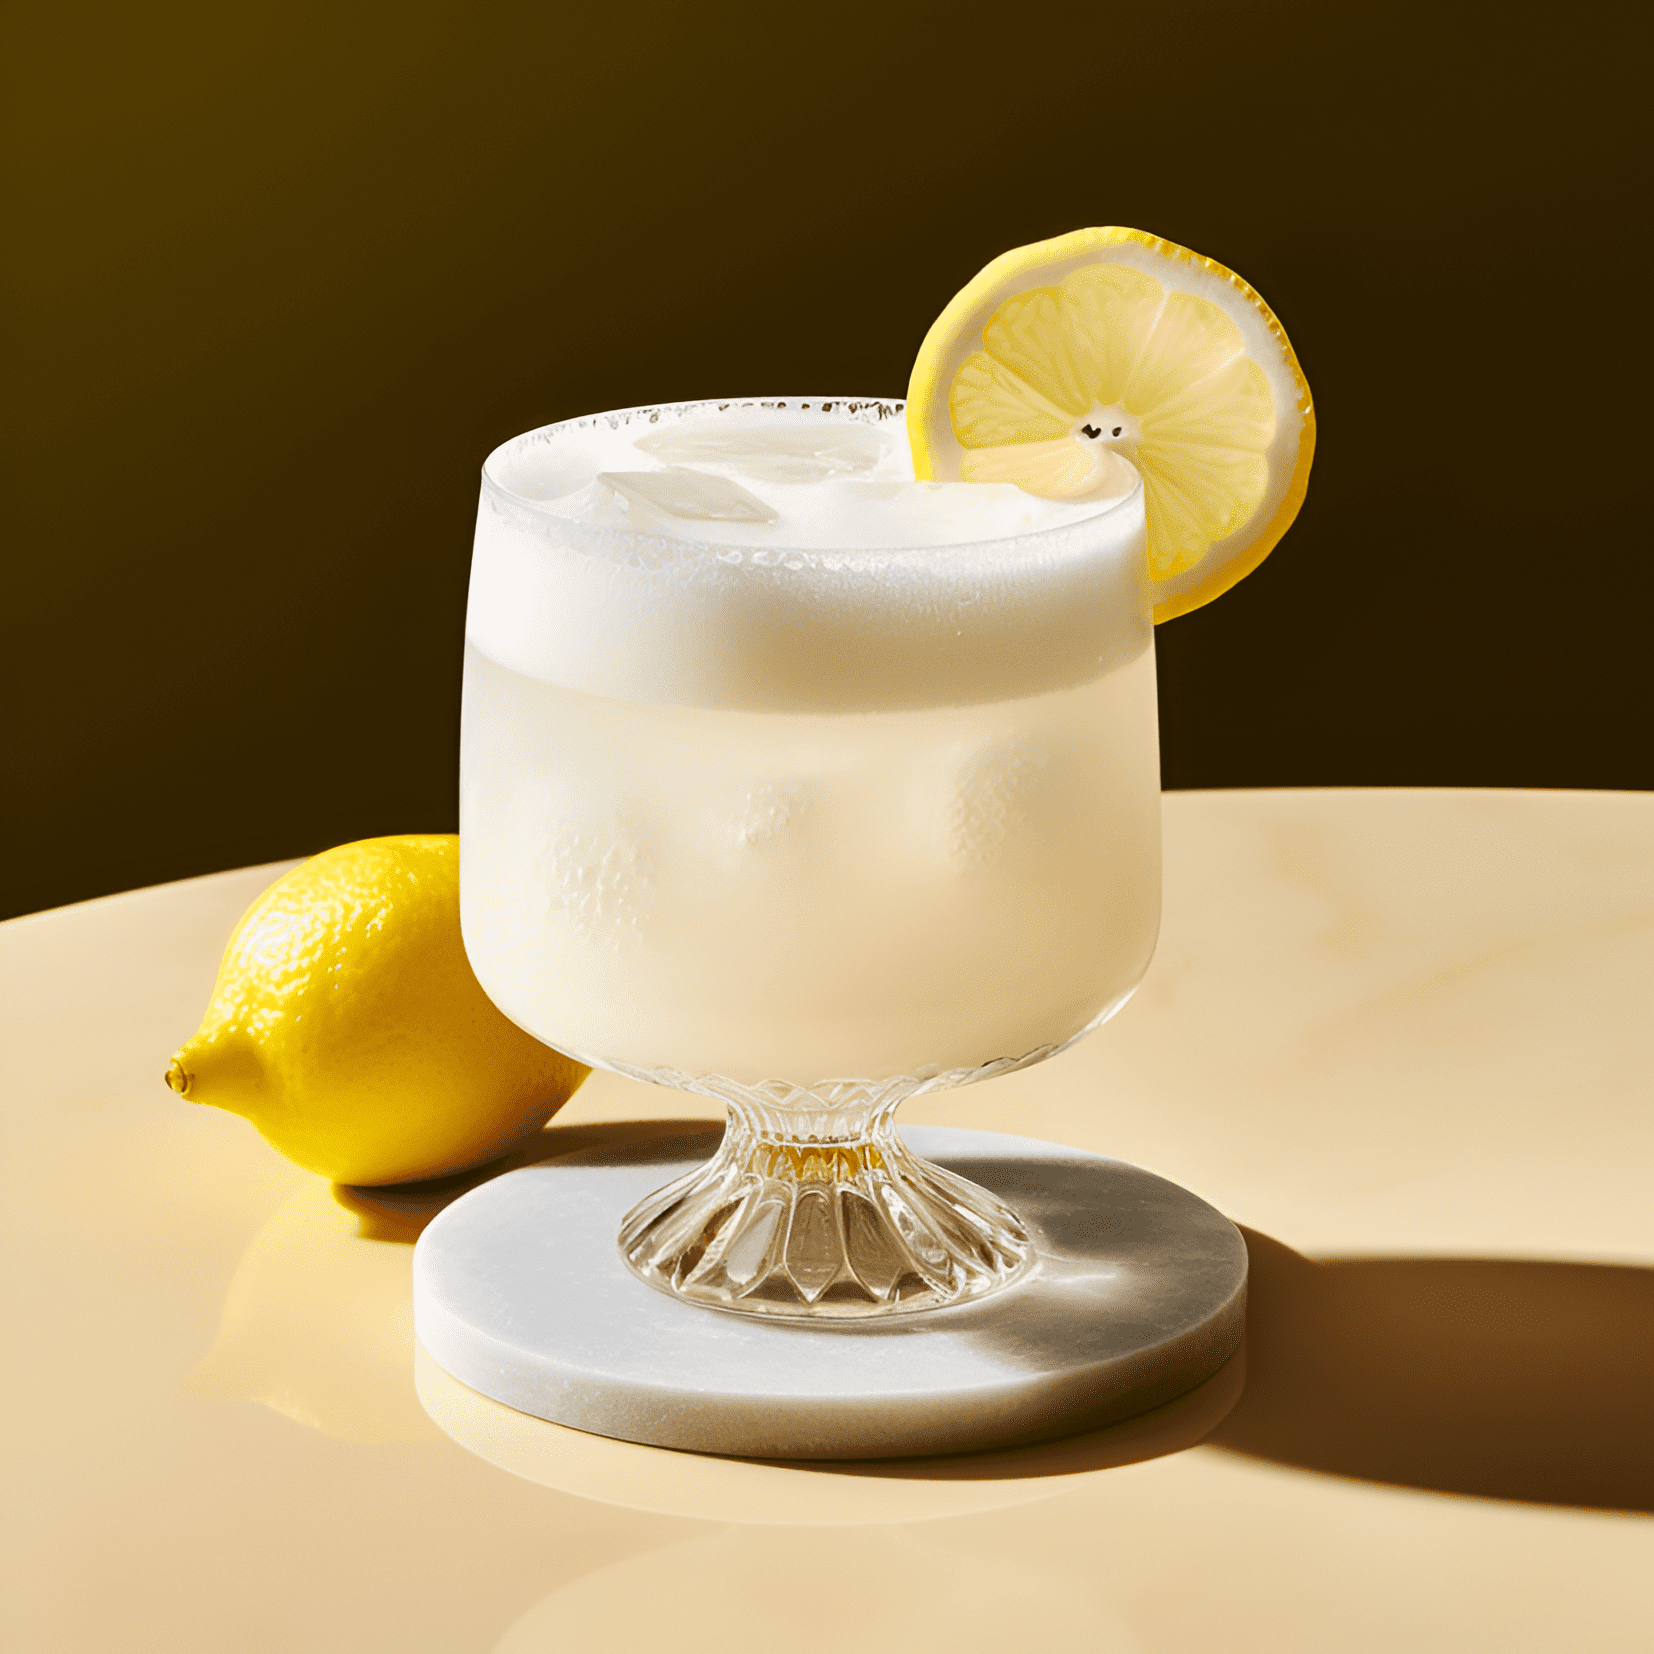 Gin Sour Cocktail Recipe - The Gin Sour is a refreshing, tangy, and slightly sweet cocktail. The combination of gin, lemon juice, and simple syrup creates a well-balanced drink that is both tart and sweet, with a hint of botanical flavors from the gin.